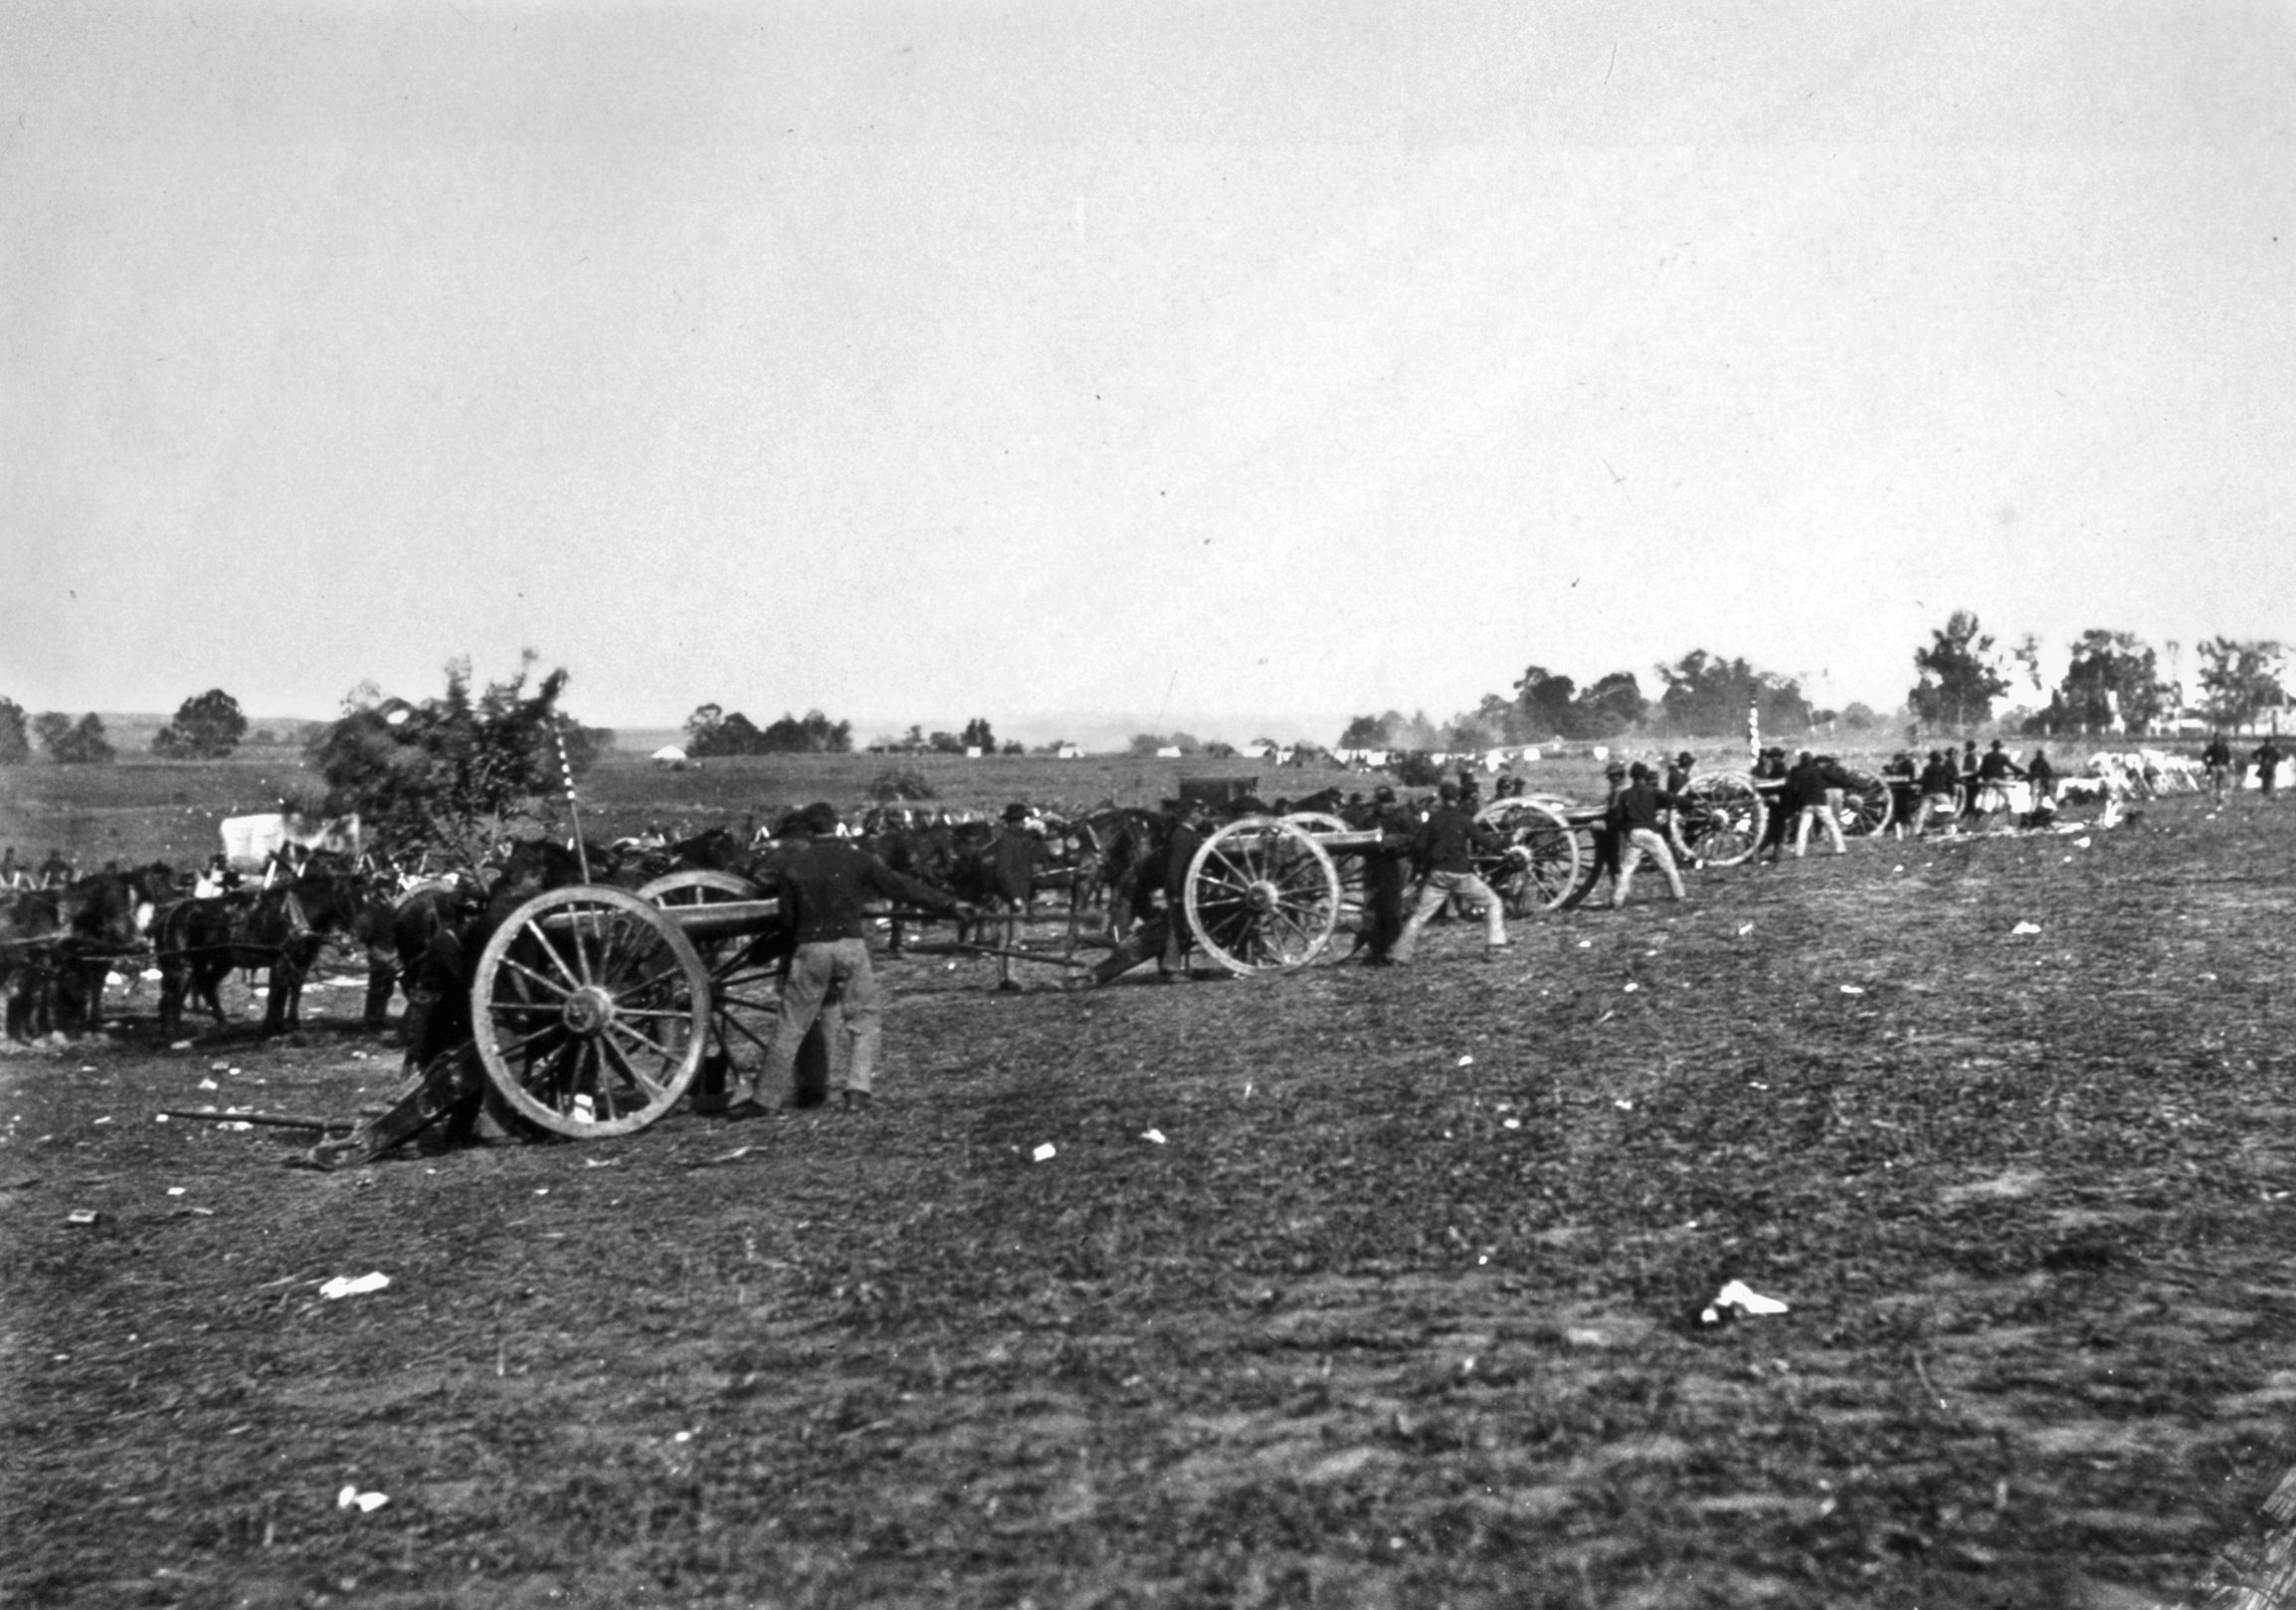 Battery D, 5th U.S. Artillery, arrayed for battle. Union gunners did yeoman’s work at Fredericksburg but could not turn the tide.